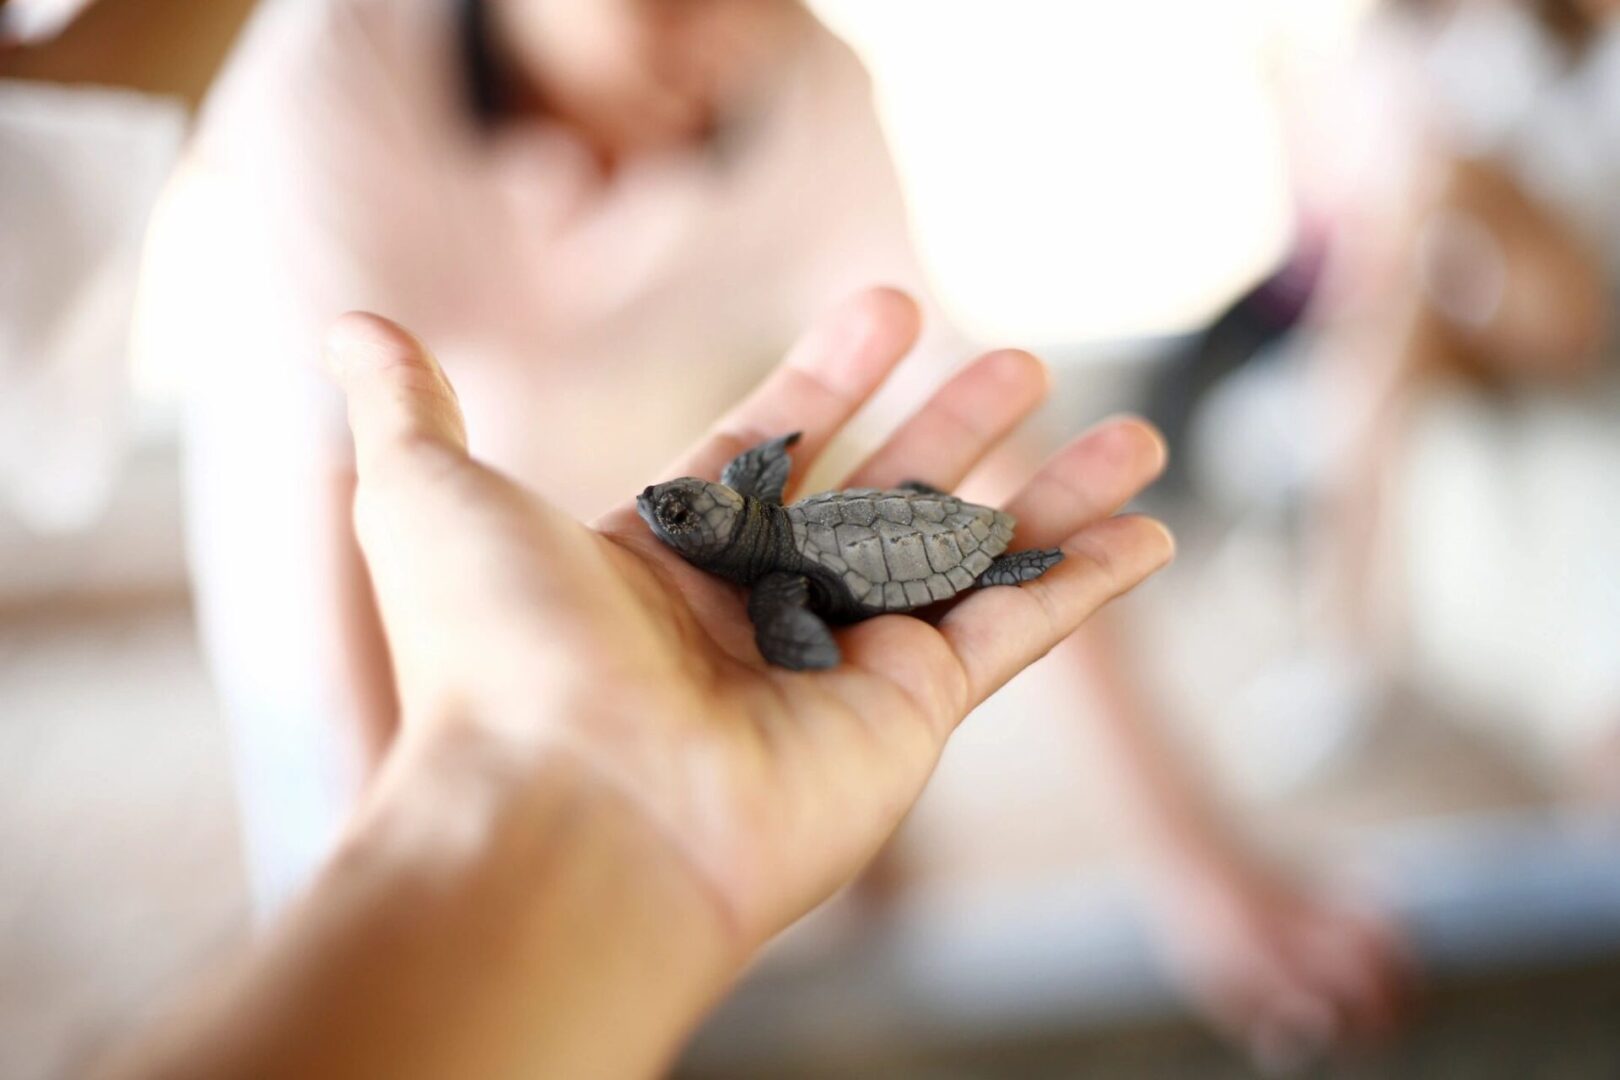 A person holding a small turtle in their hand.